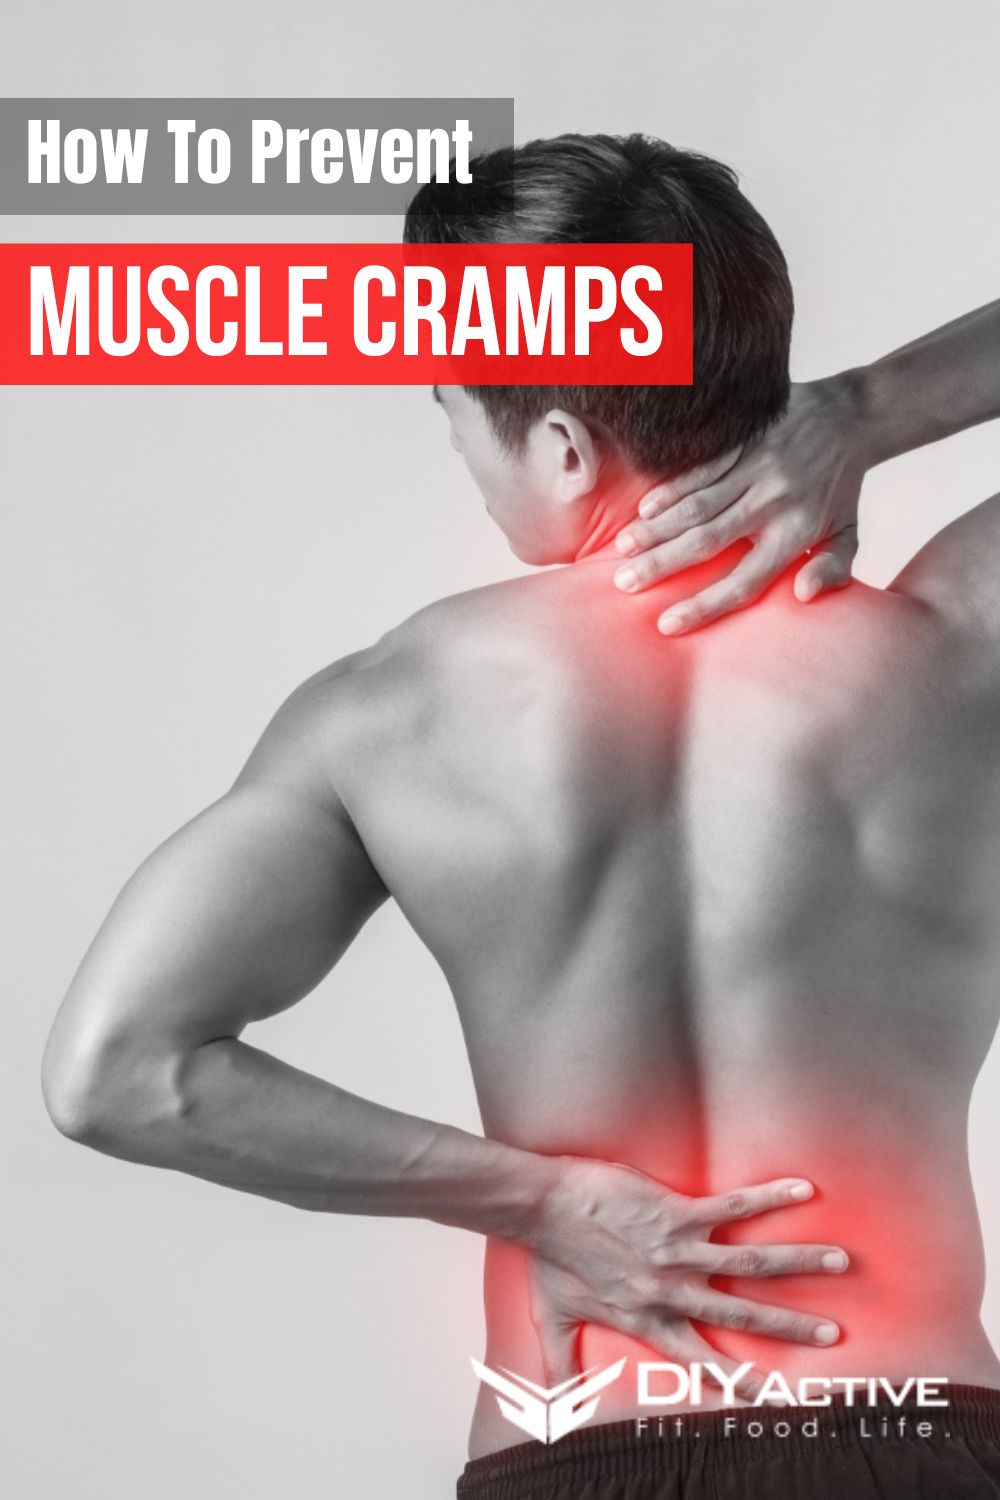 How To Prevent Muscle Cramps 2